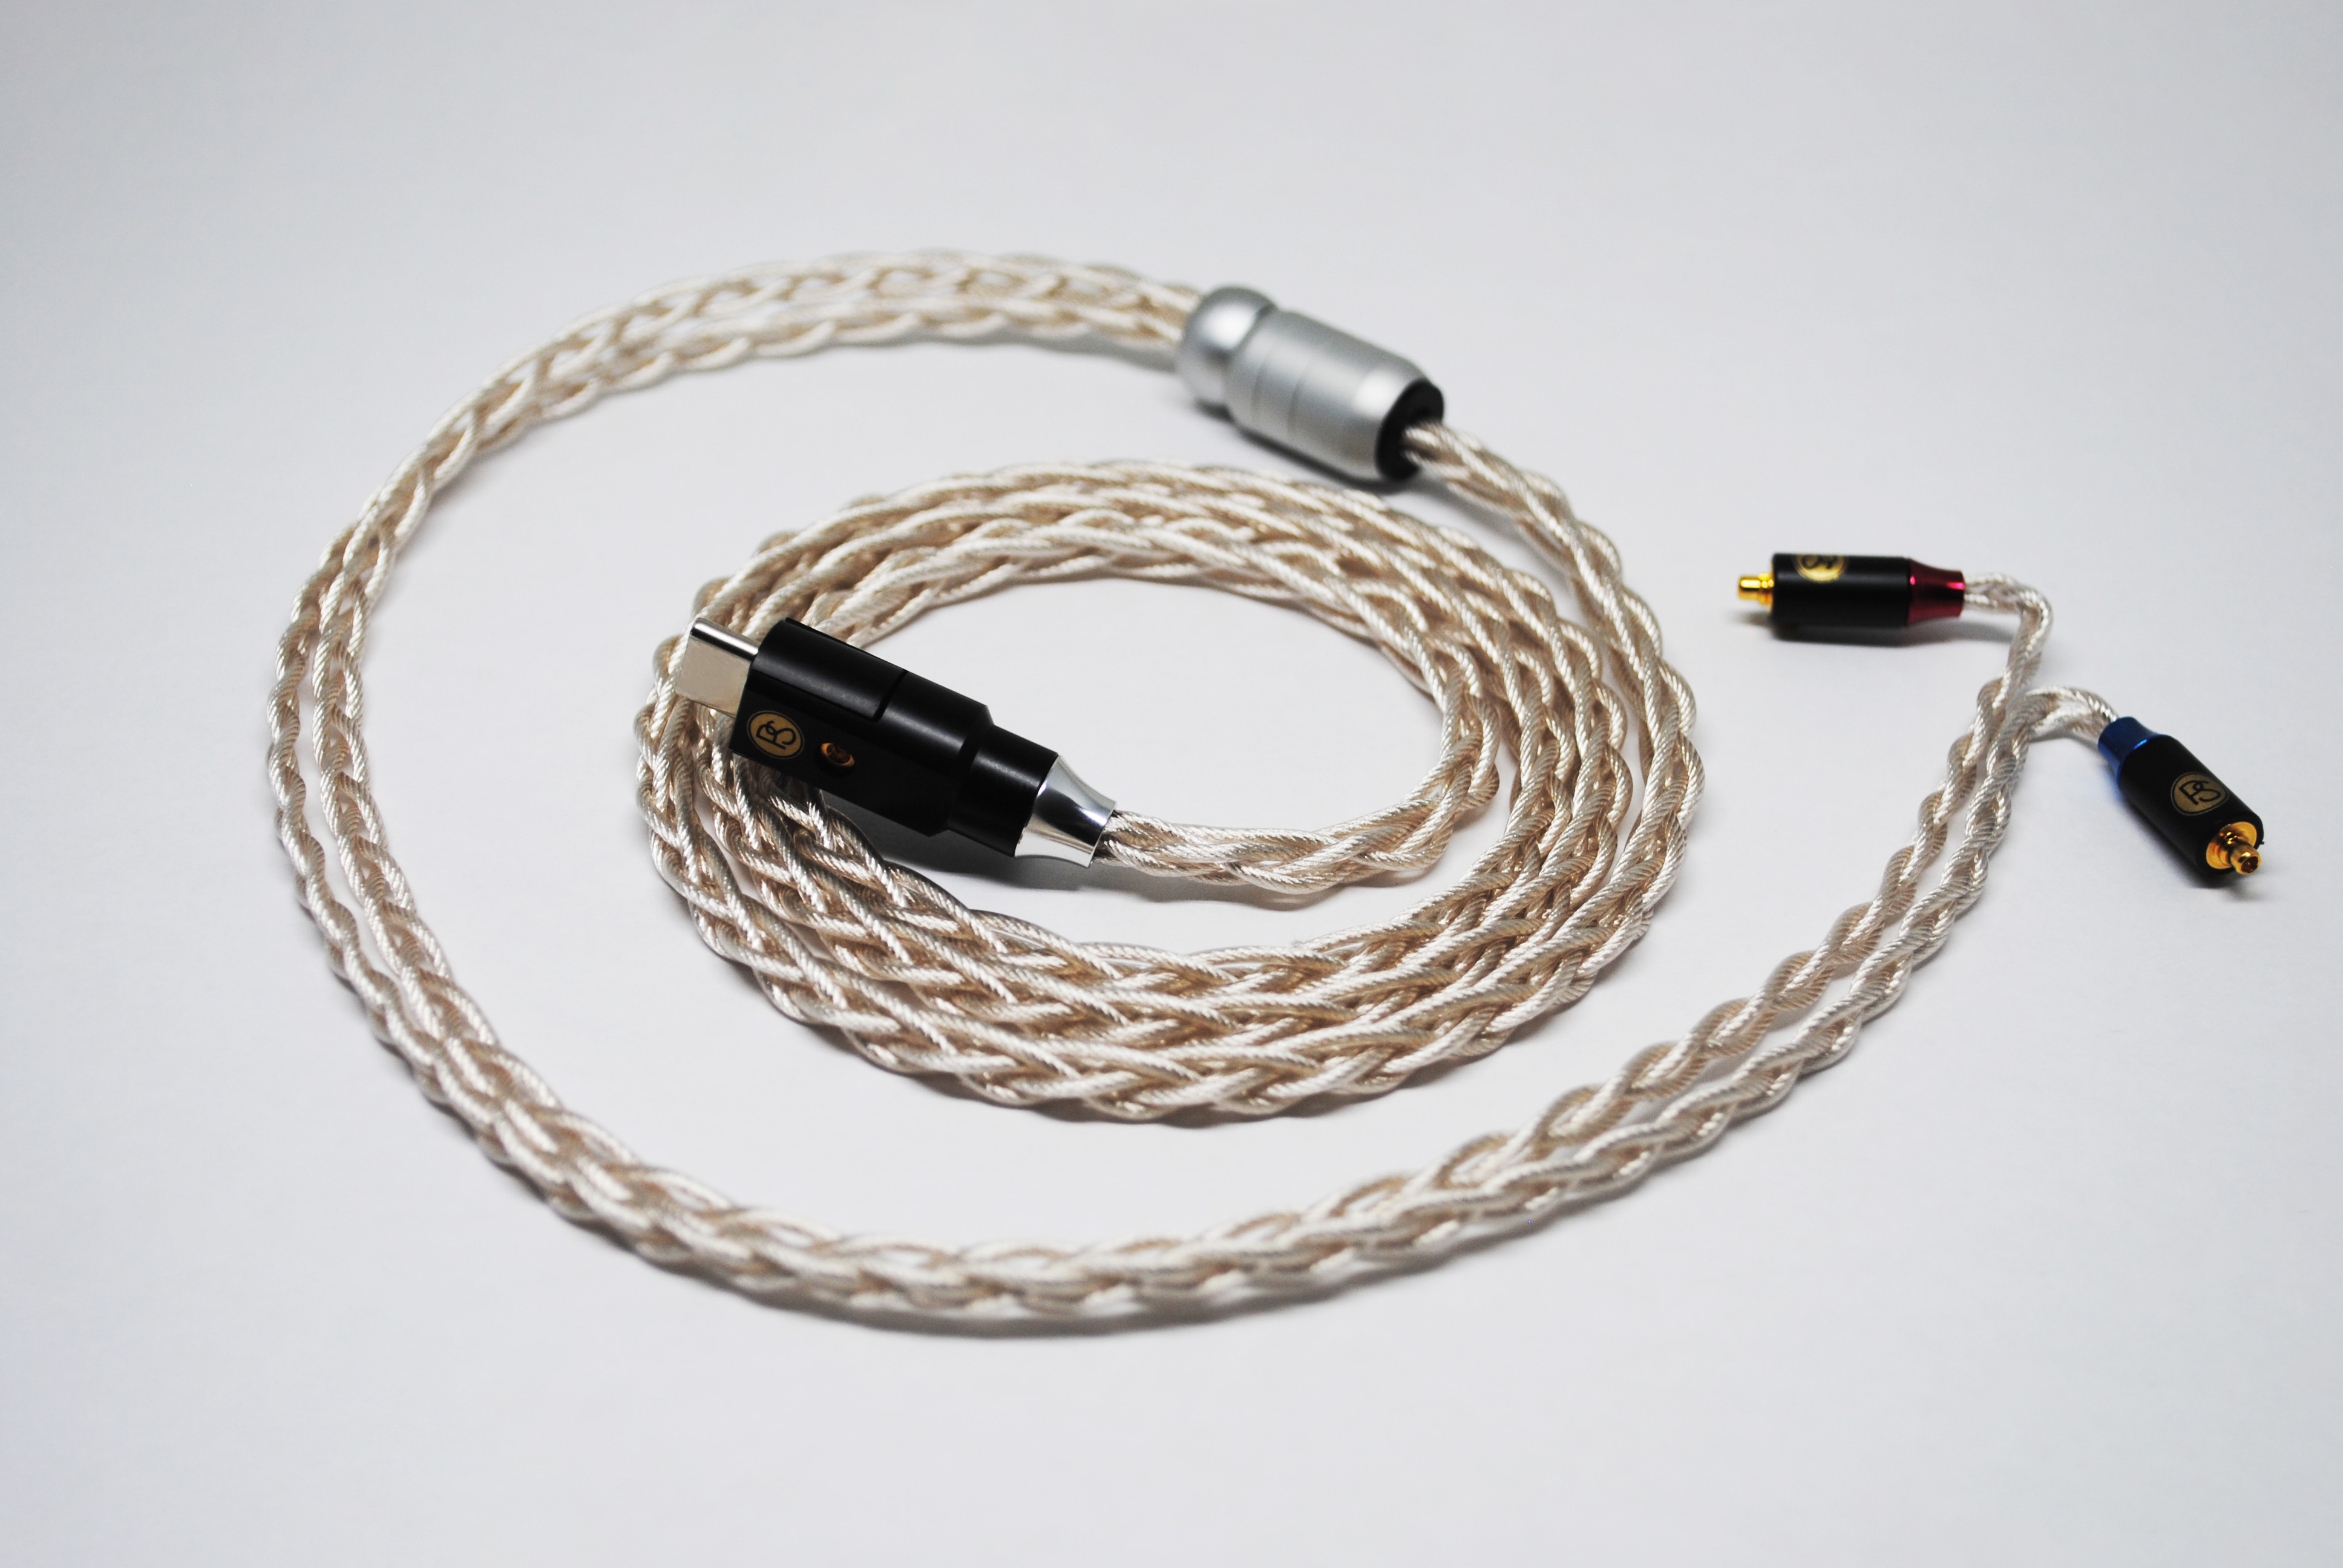 X8 Series Custom Cable for Headphones